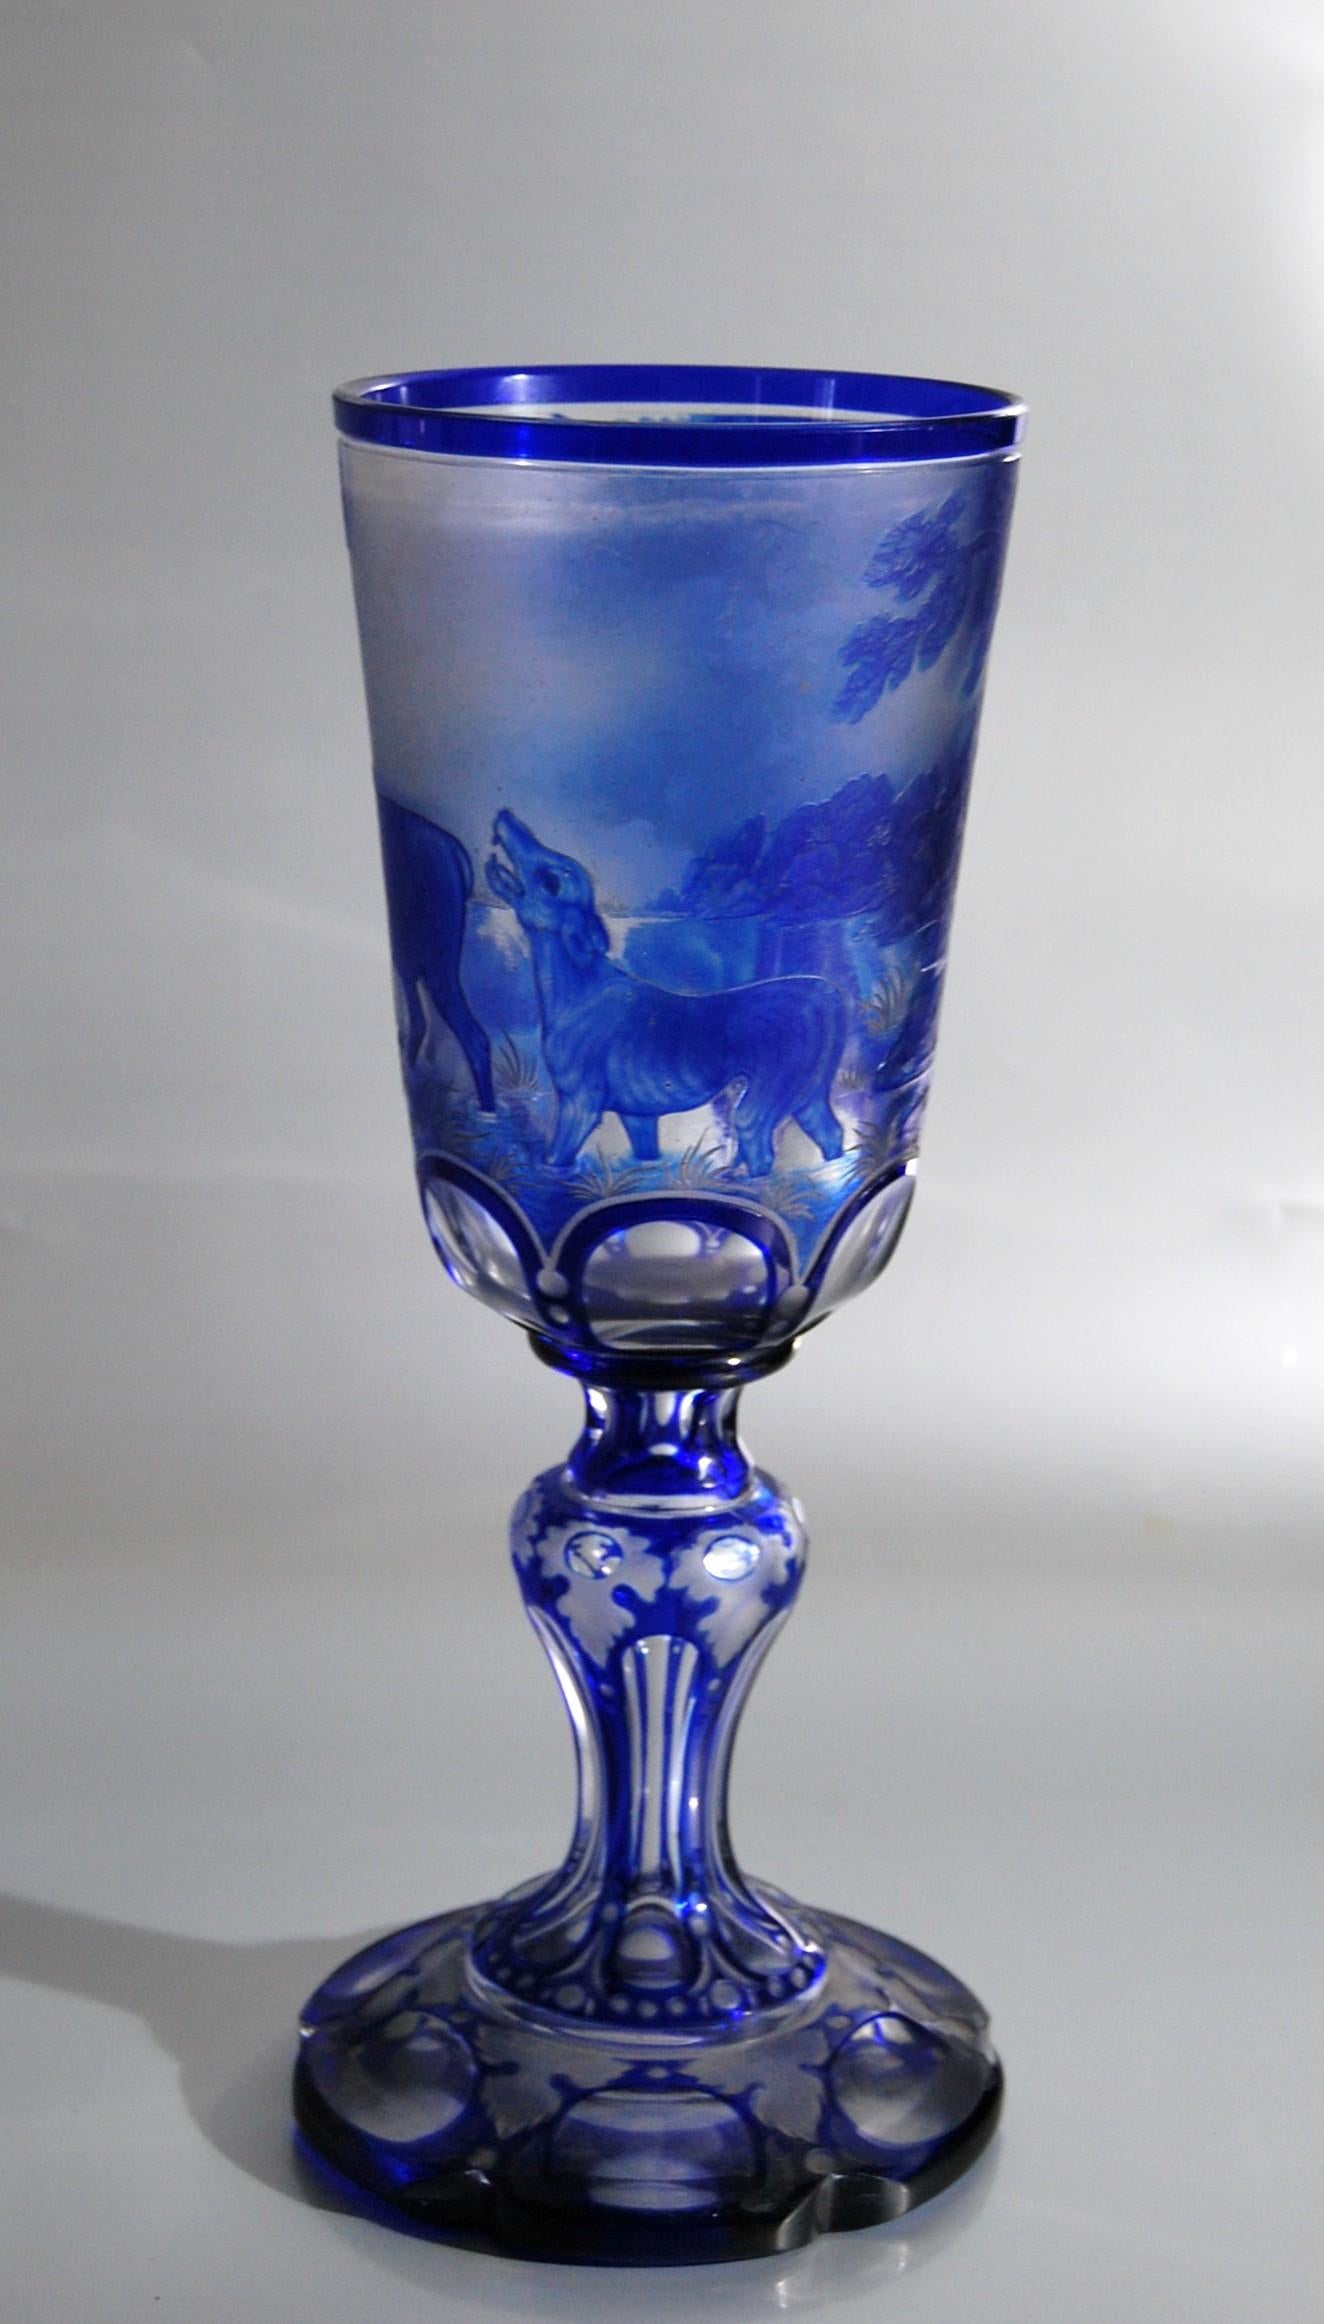 Large blue overlay Bohemian crystal hunting glass attributed to Karl Pfohl (1826-1894). Steinschönau, mid-19th century, around 1860 - 1880

Superb revolving frieze released with acid and engraved with a wheel decorated with a dog fight with a